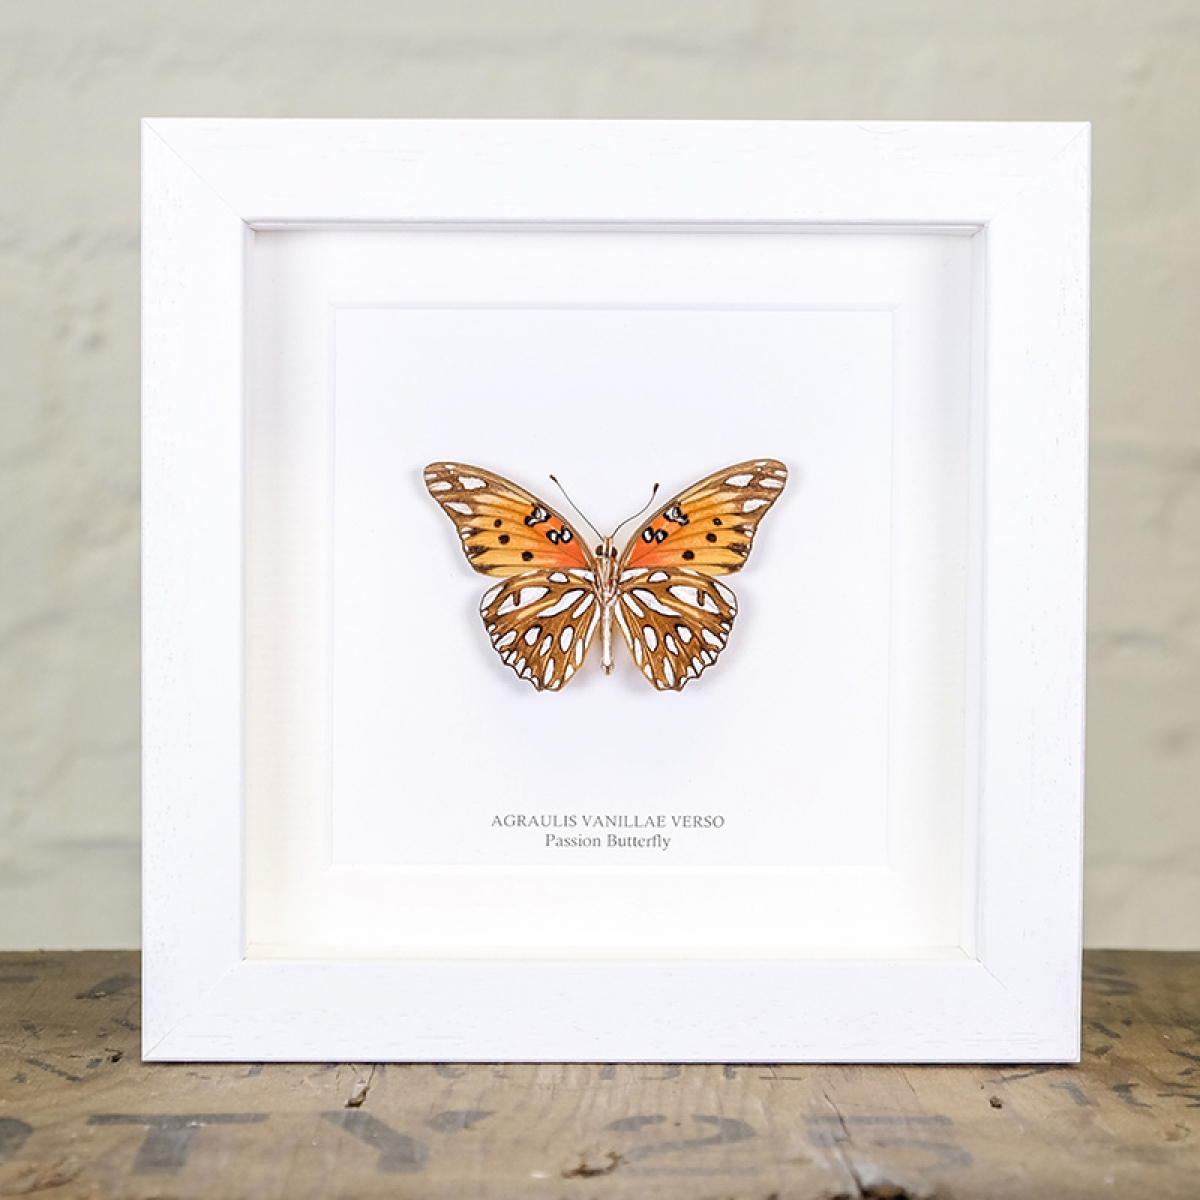 Passion Butterfly in Box Frame (Agraulis vanillae verso)